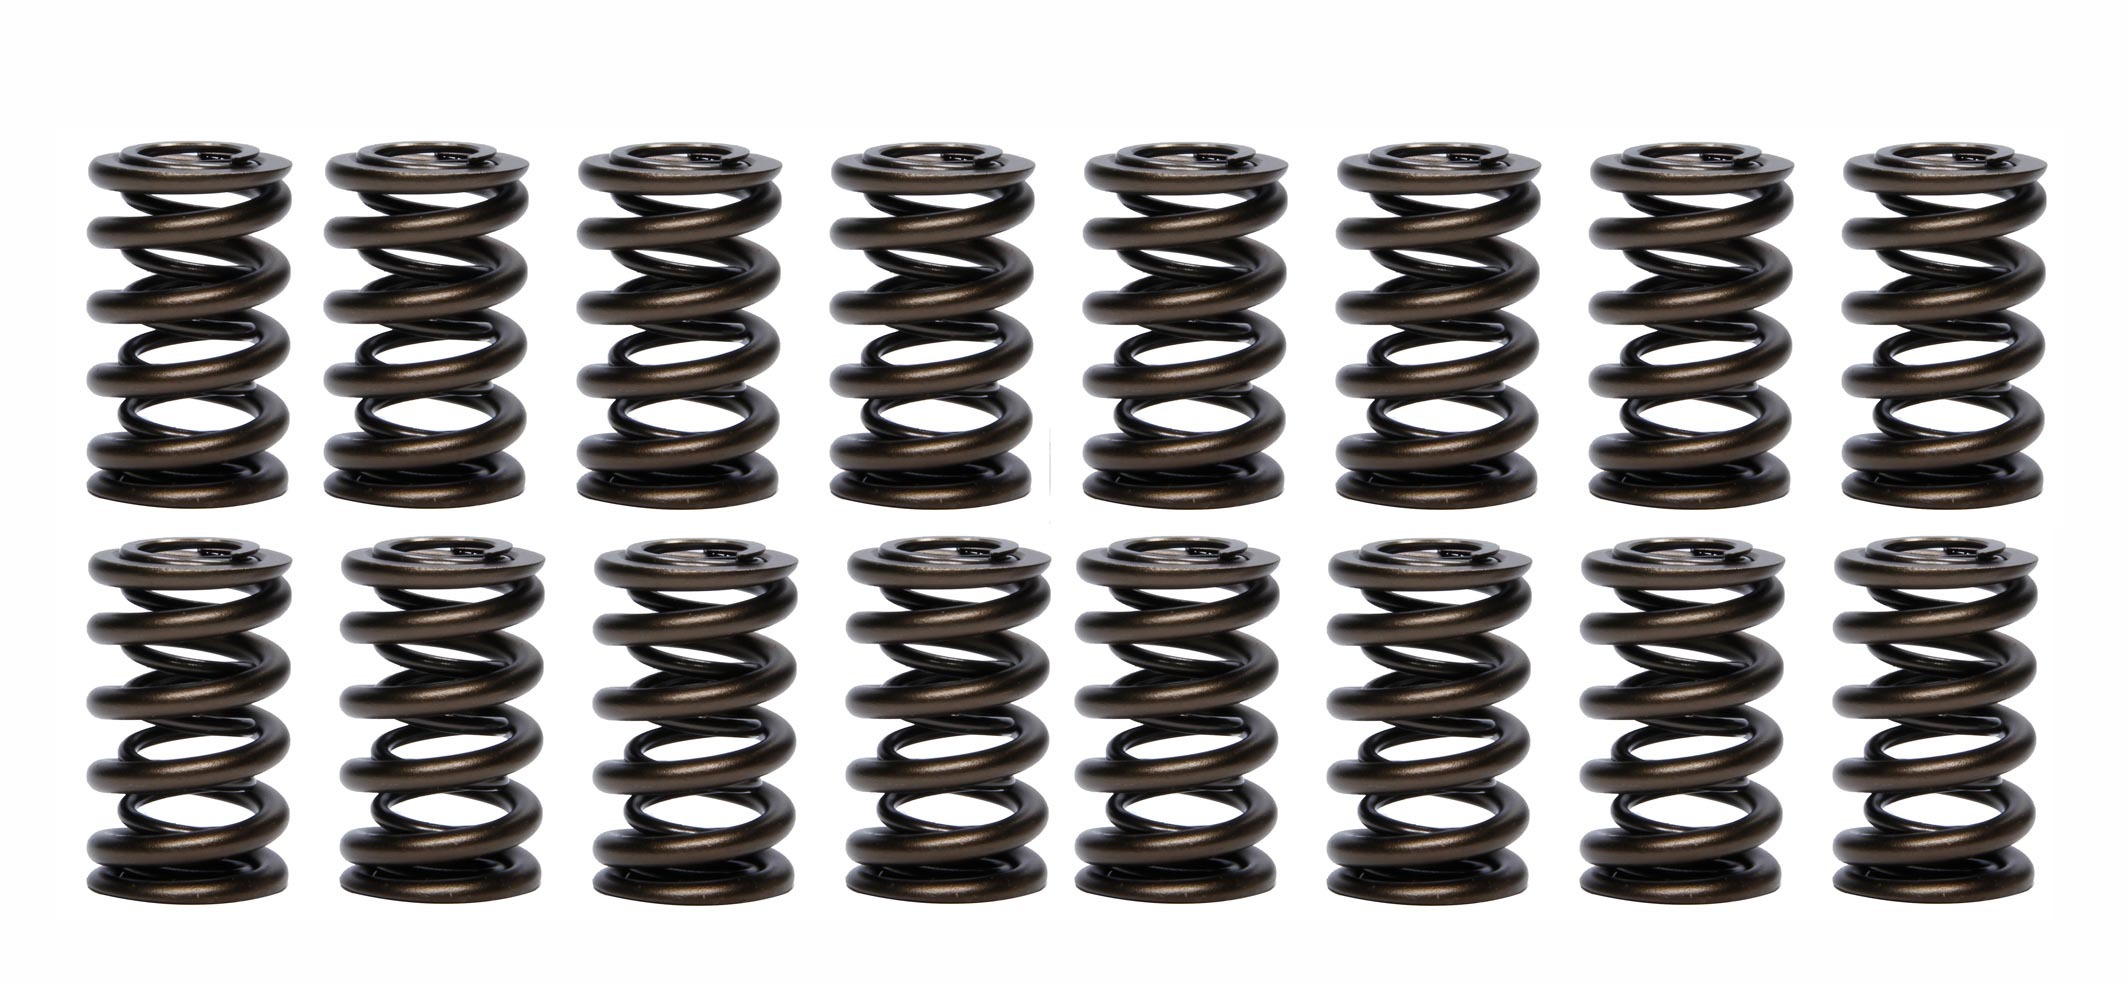 PAC Springs PAC-1203 Valve Spring, 1200 Series, Dual Spring, 610 lb/in Spring Rate, 1.115 in Coil Bind, 1.260 in OD, Set of 16